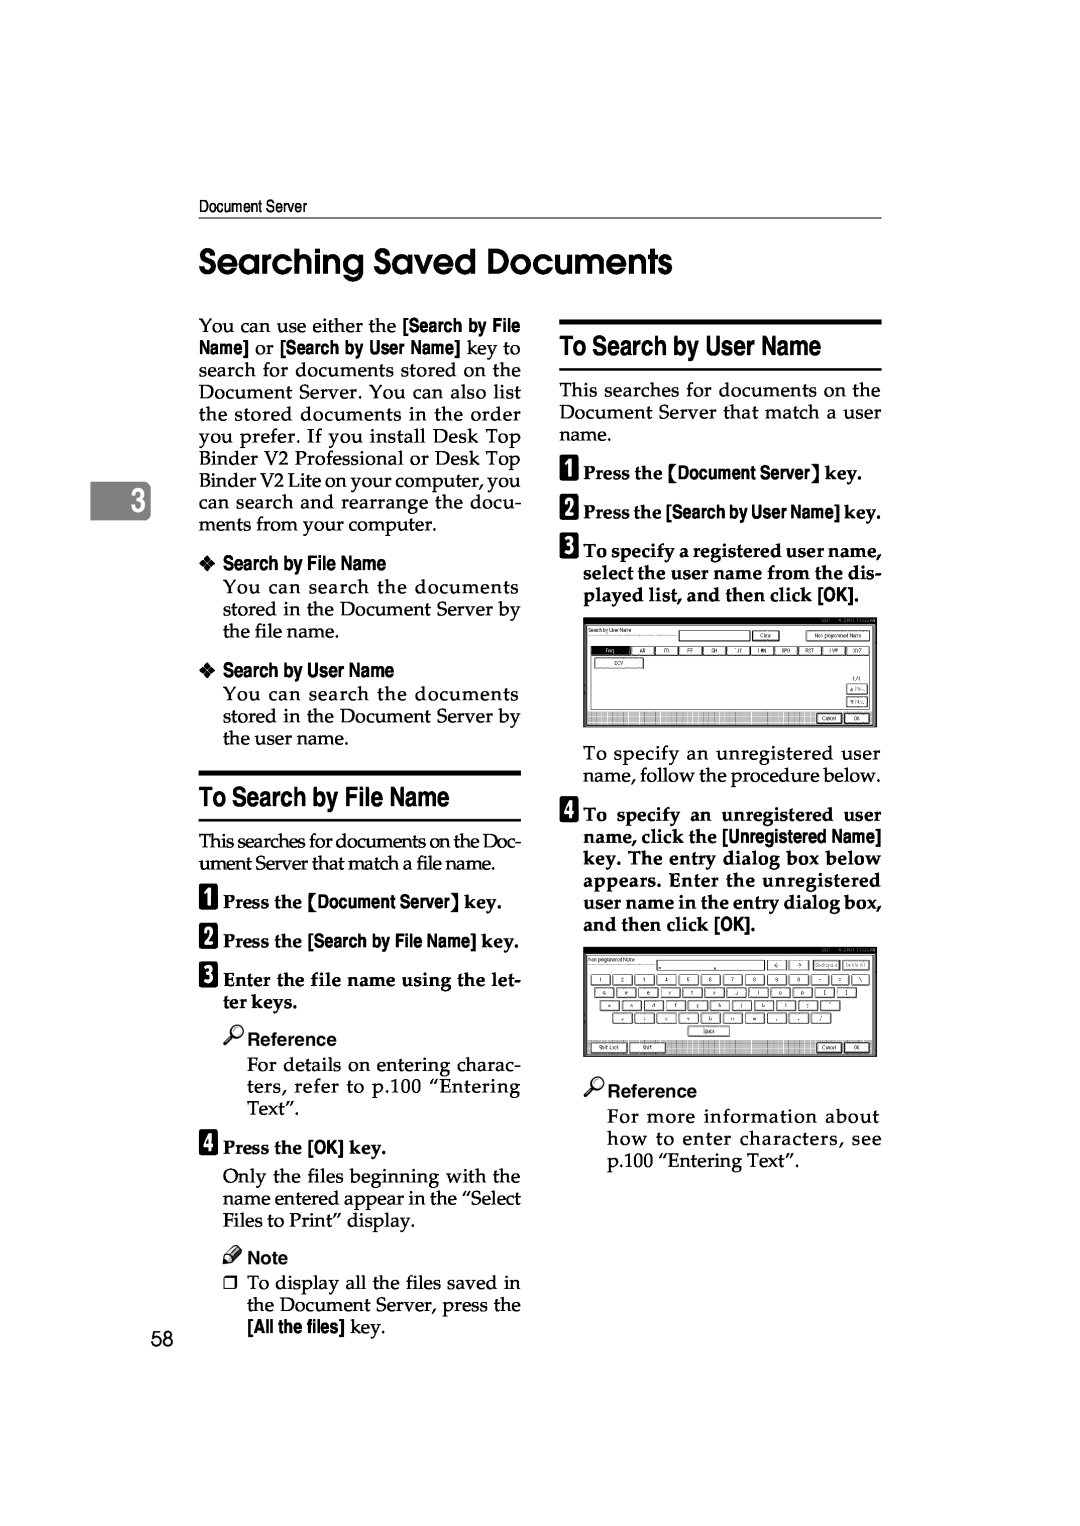 Lanier 5627 AG Searching Saved Documents, To Search by User Name, To Search by File Name, D Press the OK key, Reference 